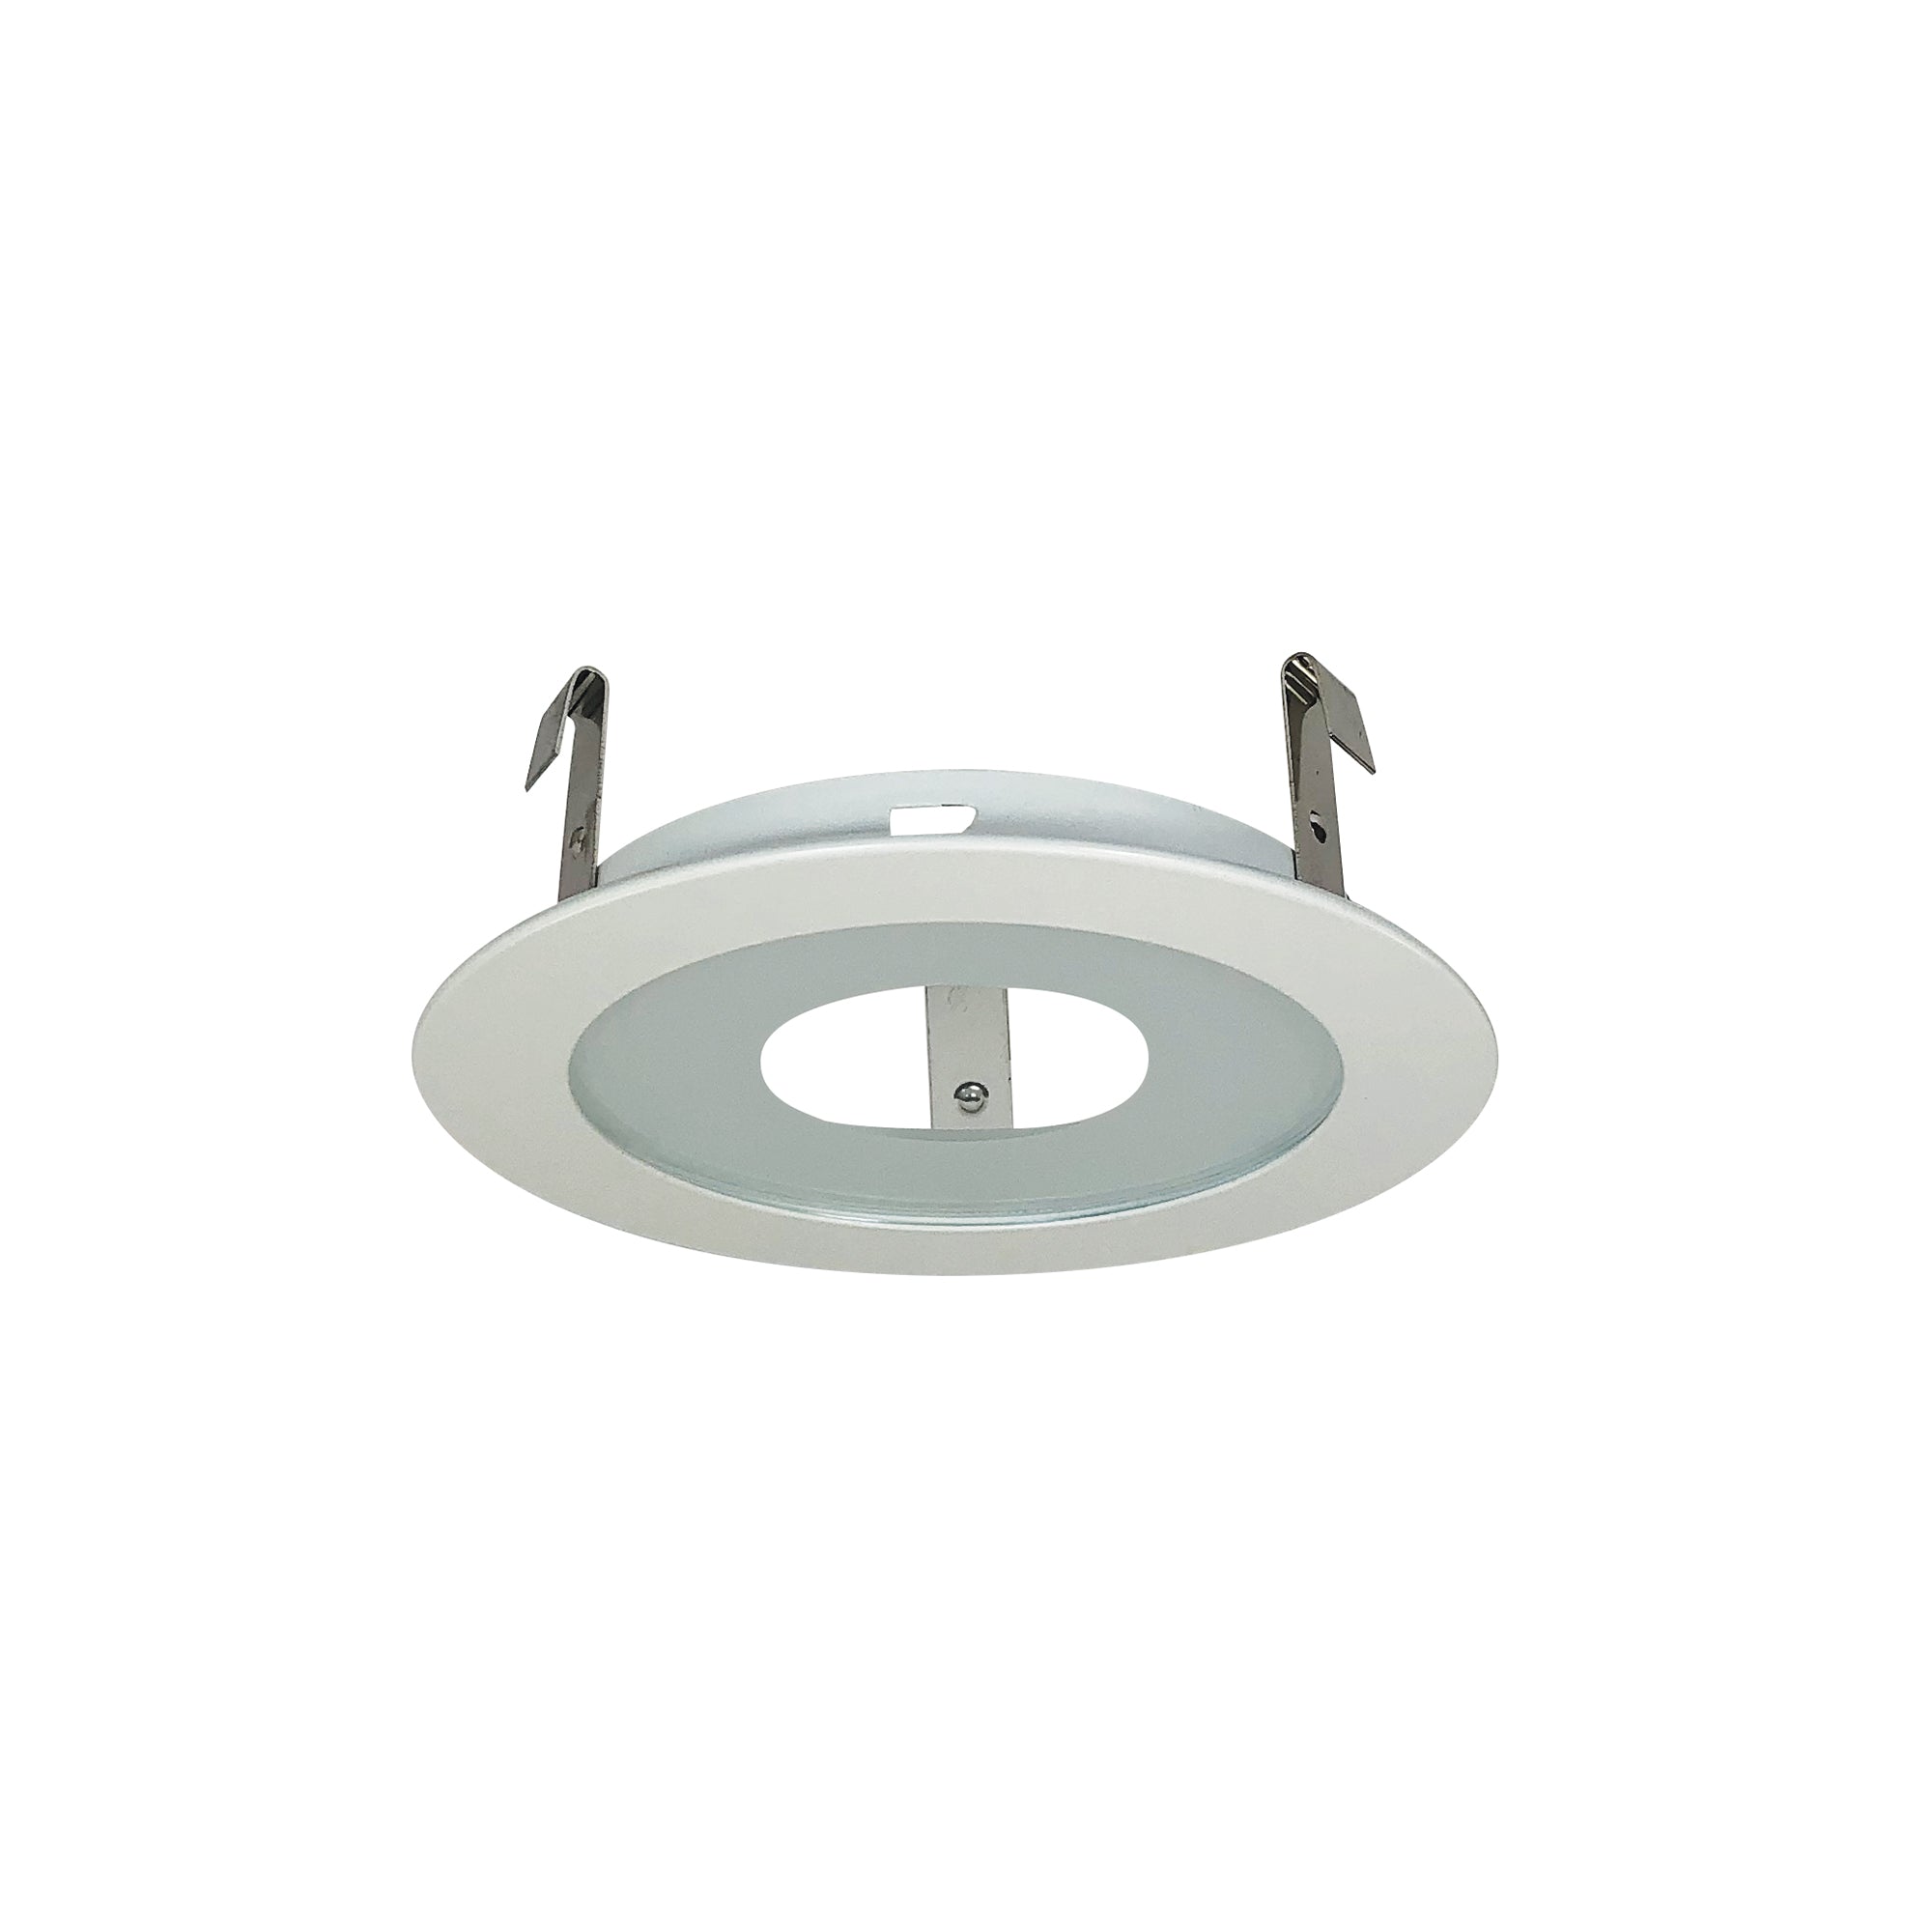 Nora Lighting NS-27W - Recessed - 4 Inch Frosted Flat Lens w/ Clear Center & Metal Trim, White